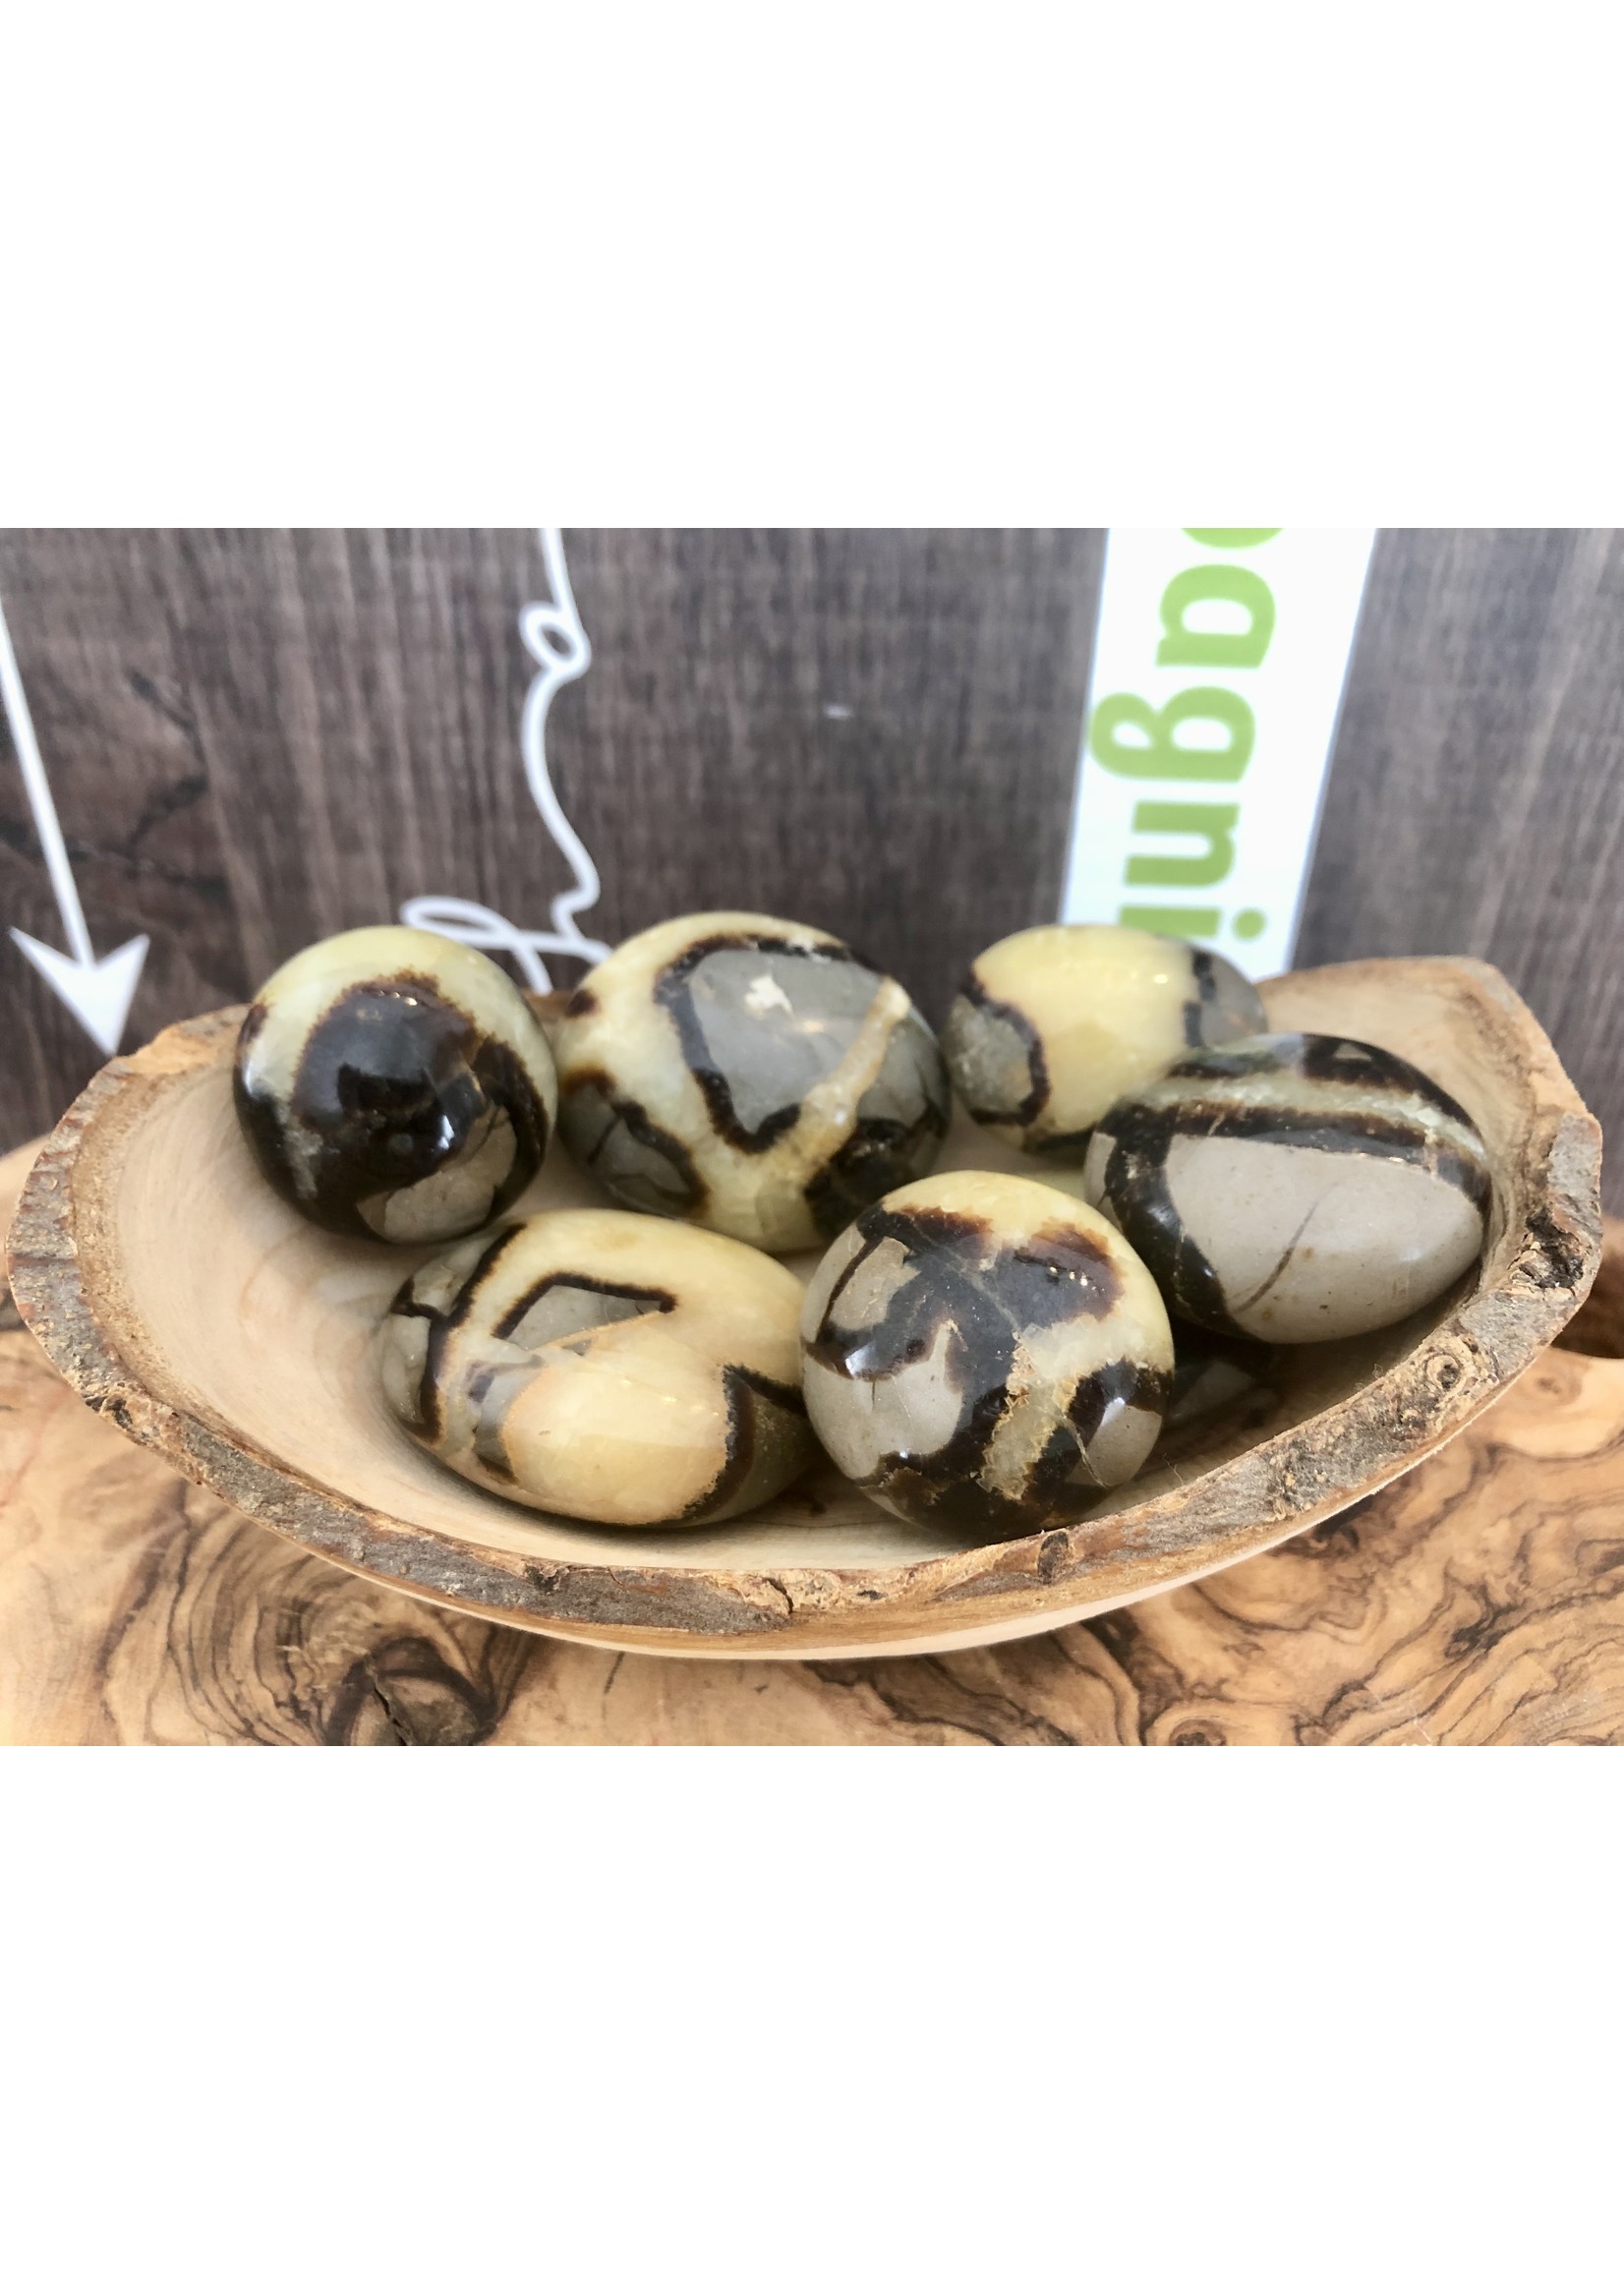 choice of septarian tumbled stone, repairs faults and energy blockages, recommended for people who have suffered an emotional shock